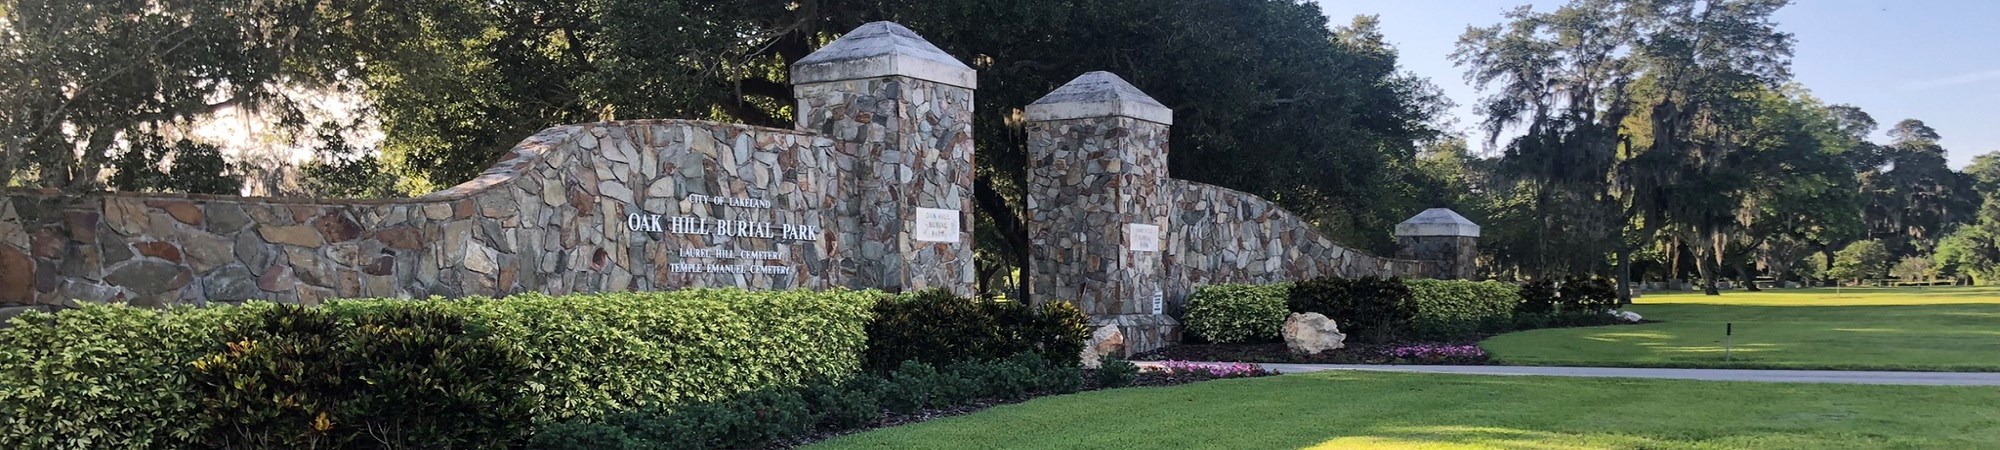 Photo of the gates at the front of Oak Hill Cemetery. There are two stone pillars with stone walls on either side and a small opening to the cemetery between them.